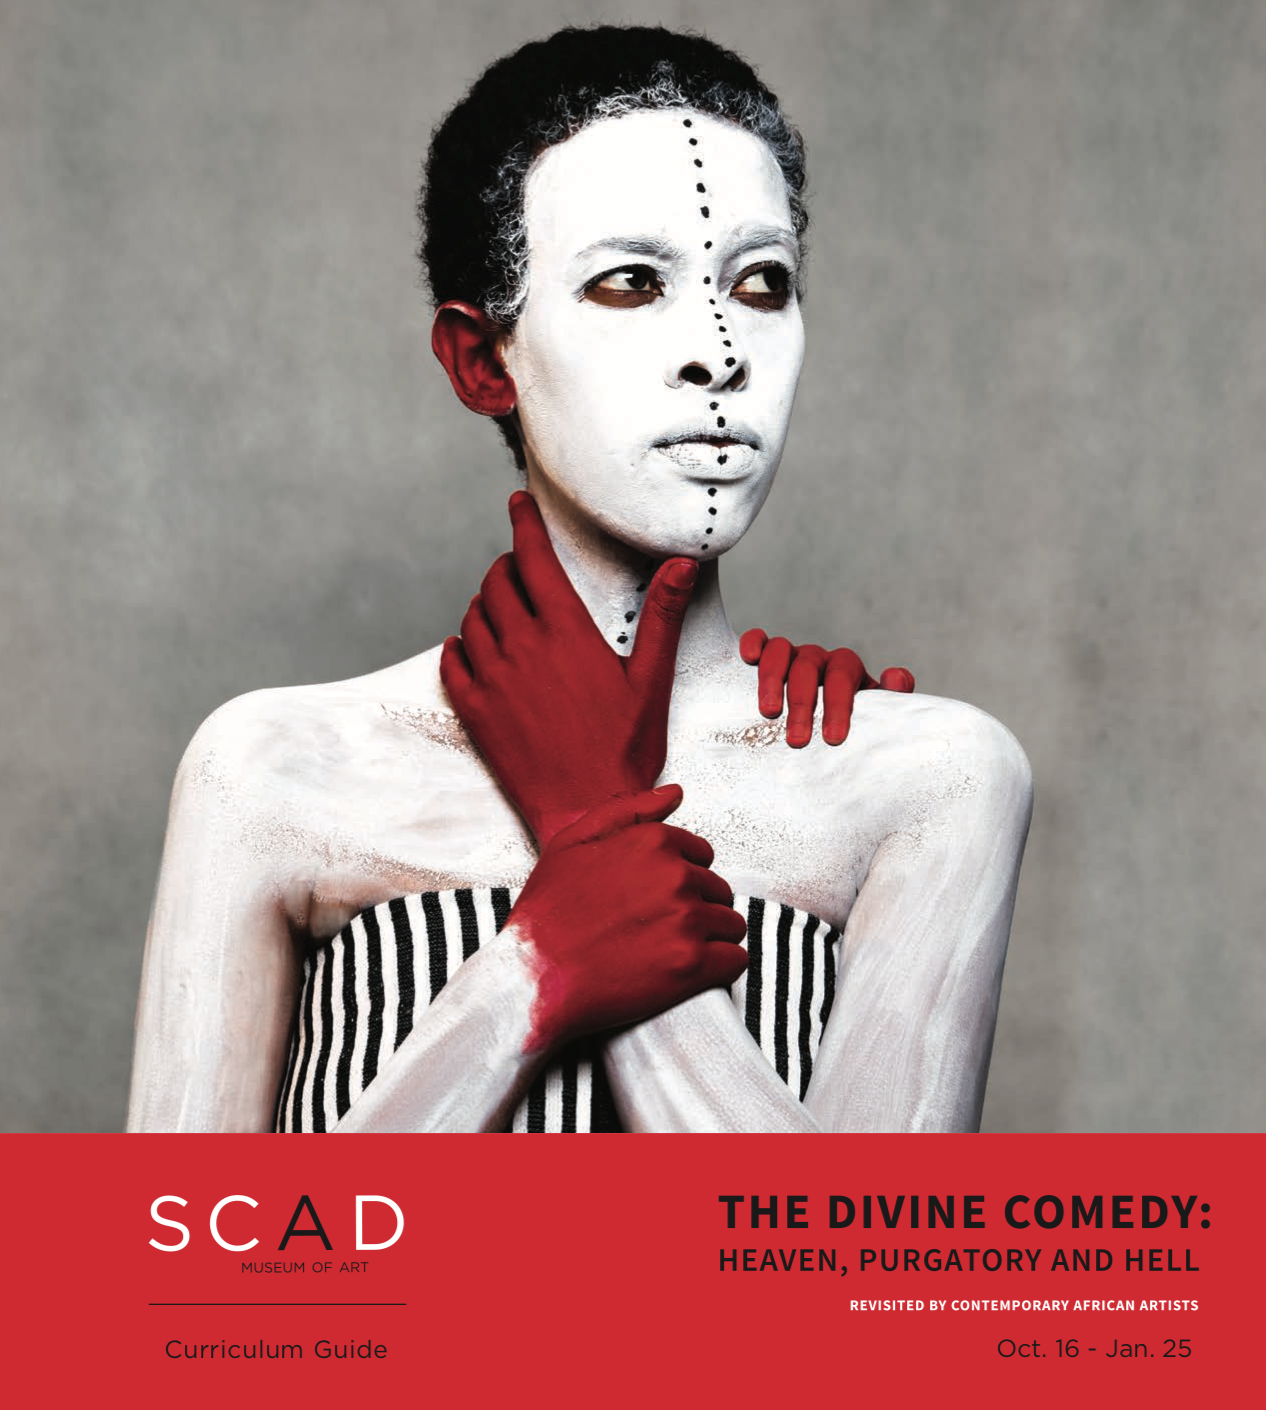 THE DIVINE COMEDY: HEAVEN, PURGATORY, AND HELL REVISITED BY CONTEMPORARY AFRICAN ARTISTS